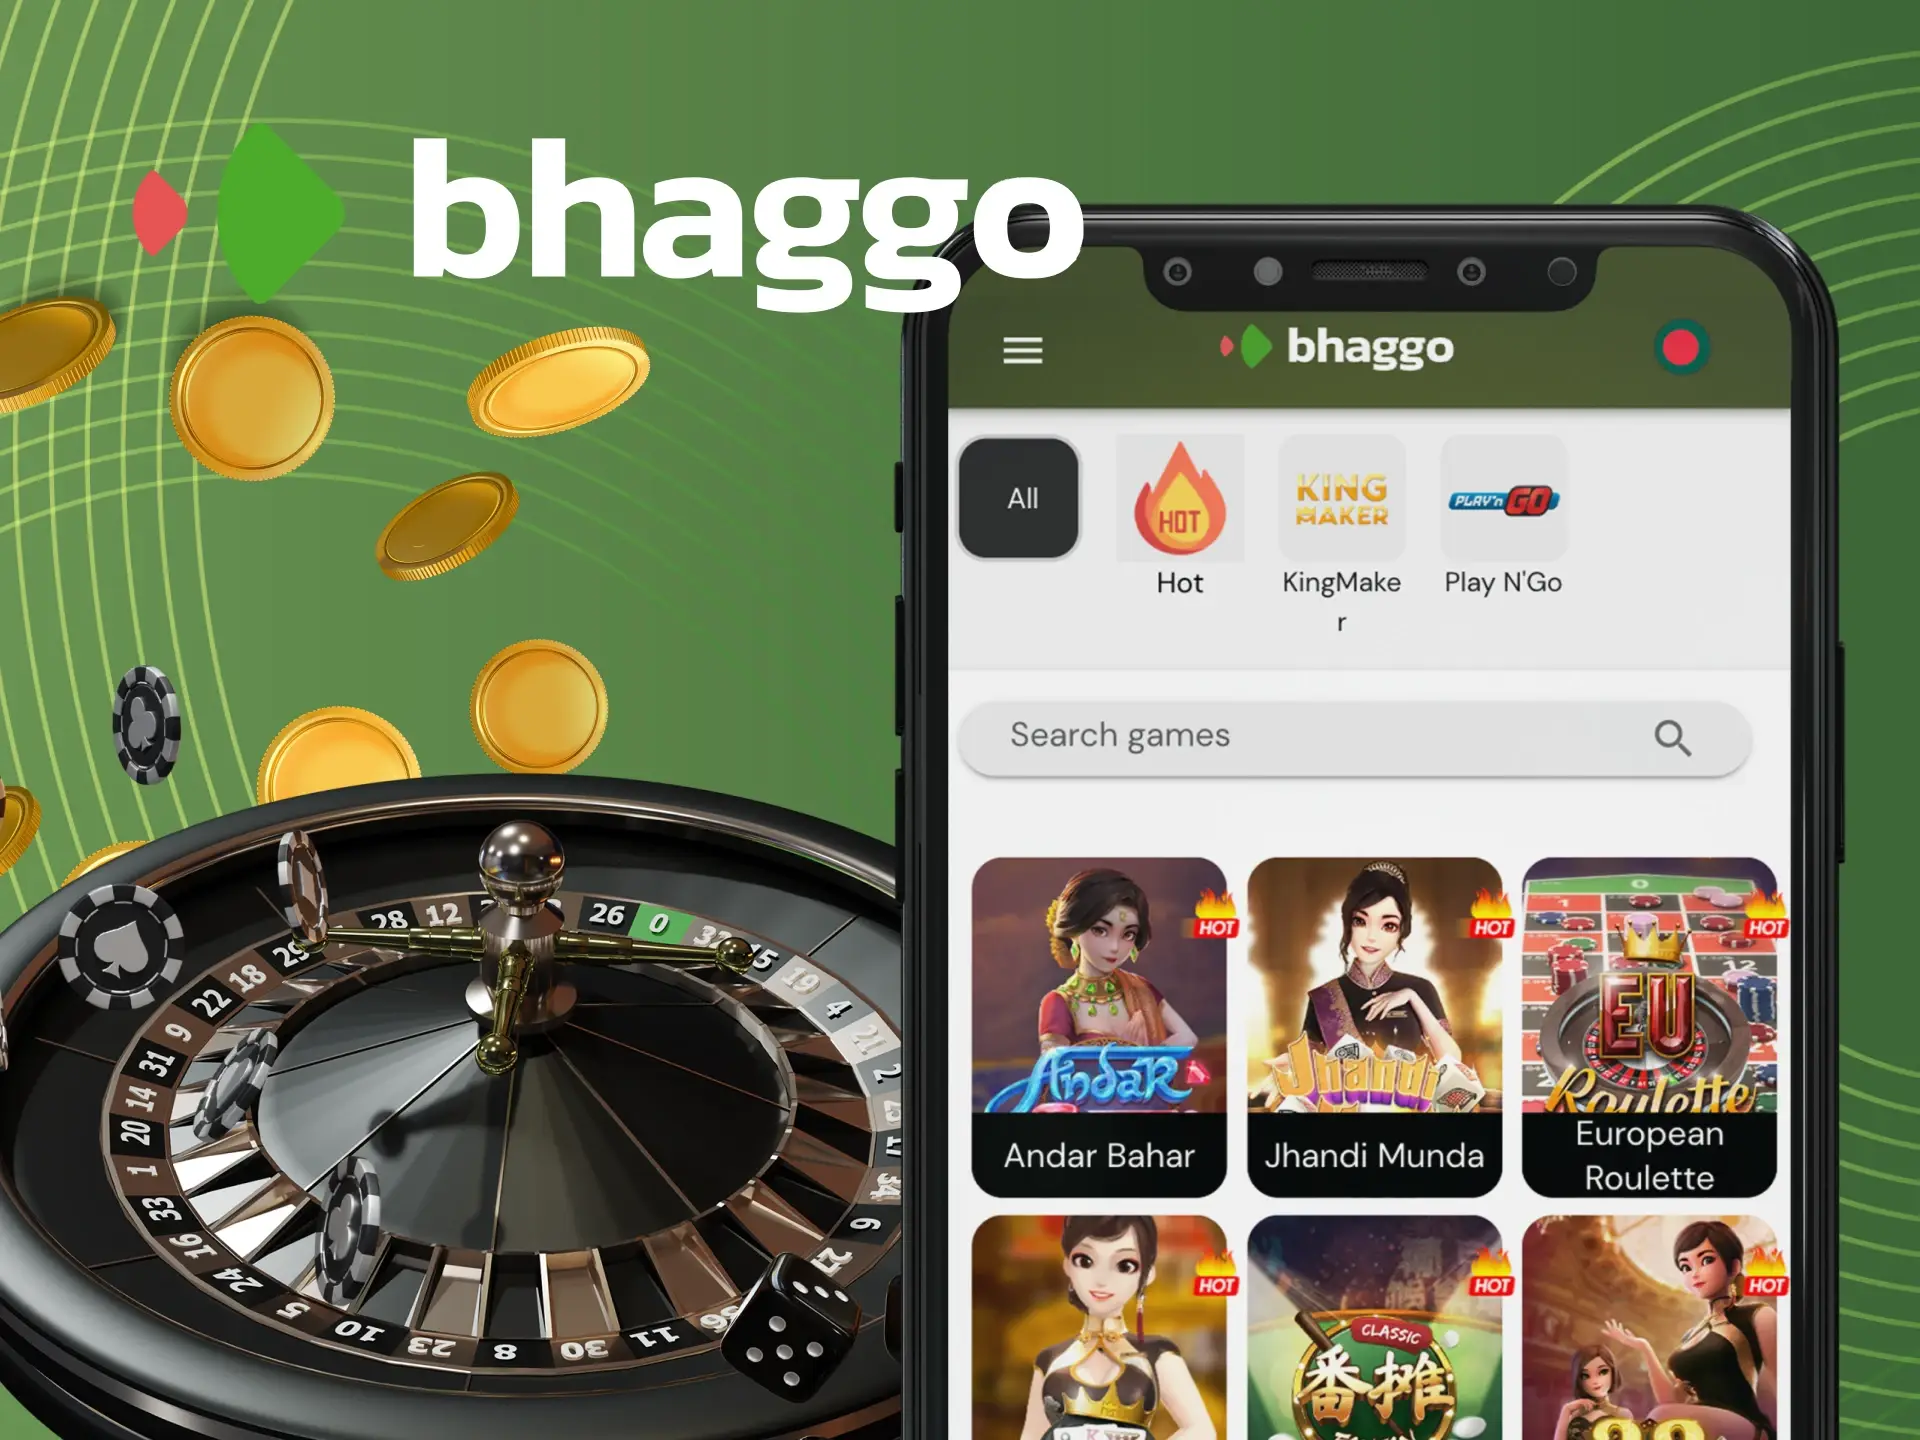 Enjoy Bhaggo table games on your mobile device.